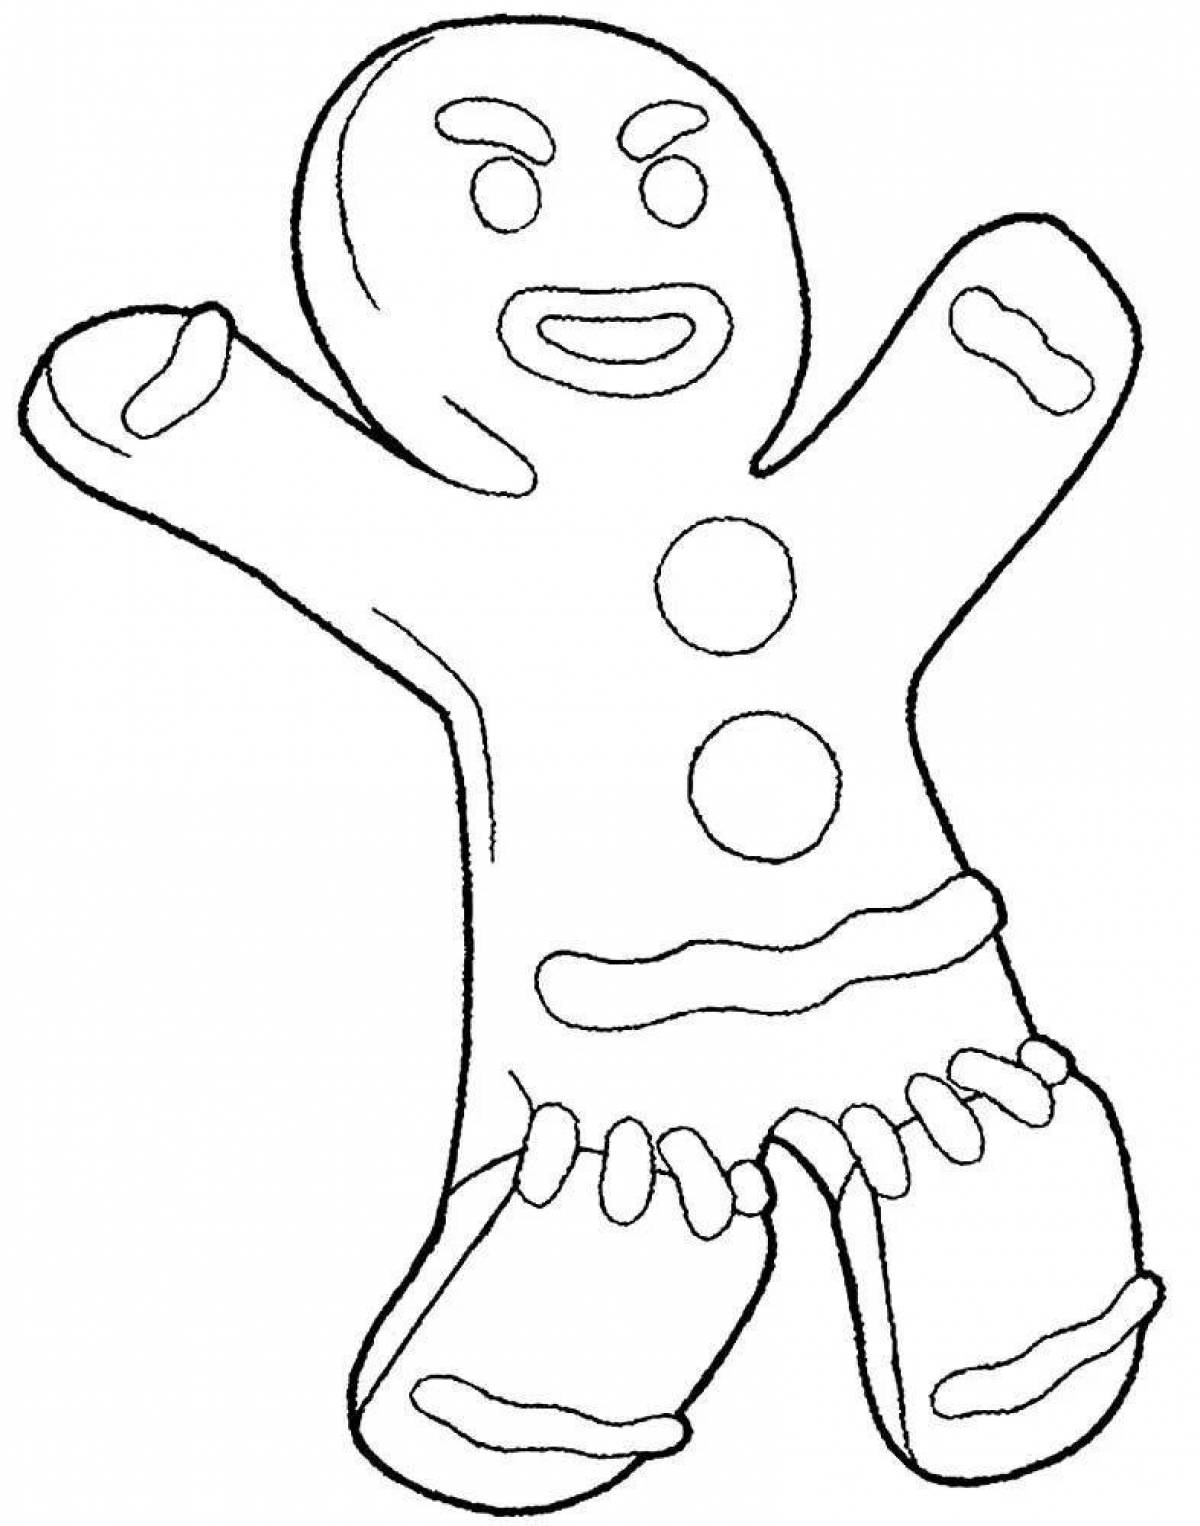 Fun cookie coloring page